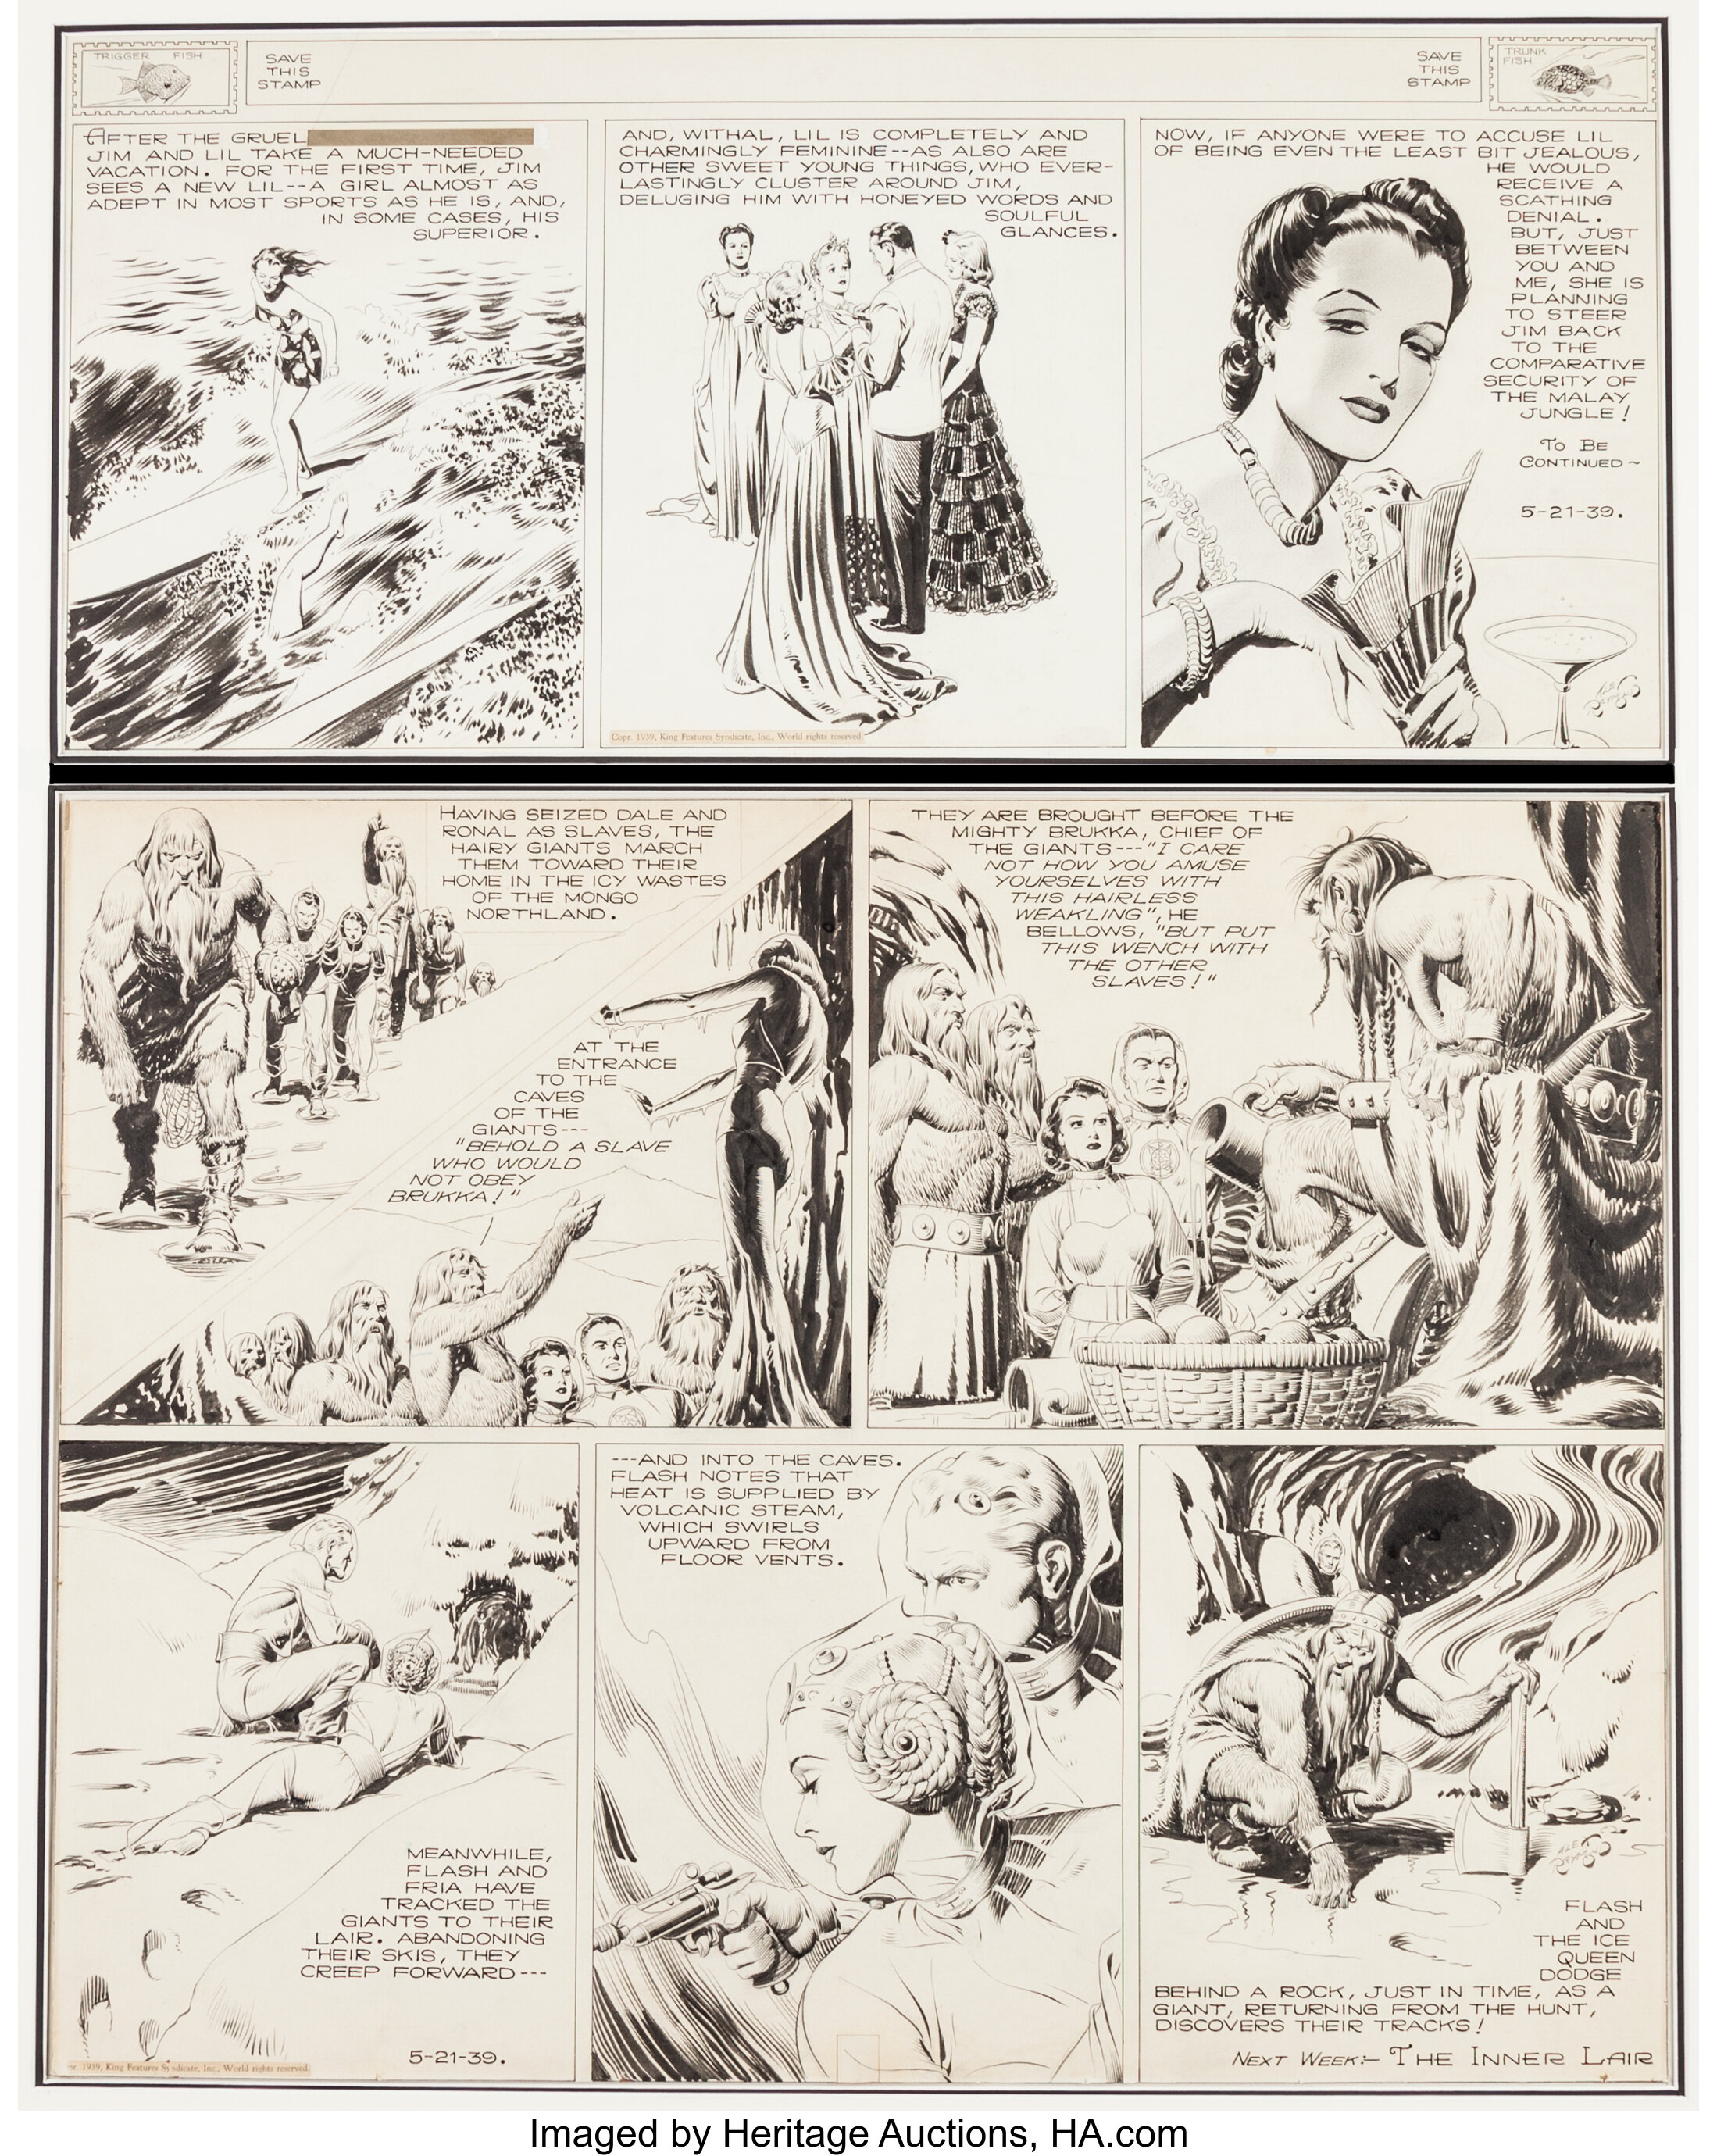 Flash Gordon Sunday by Alex Raymond from 5/17/1942 Large Full Page Size !